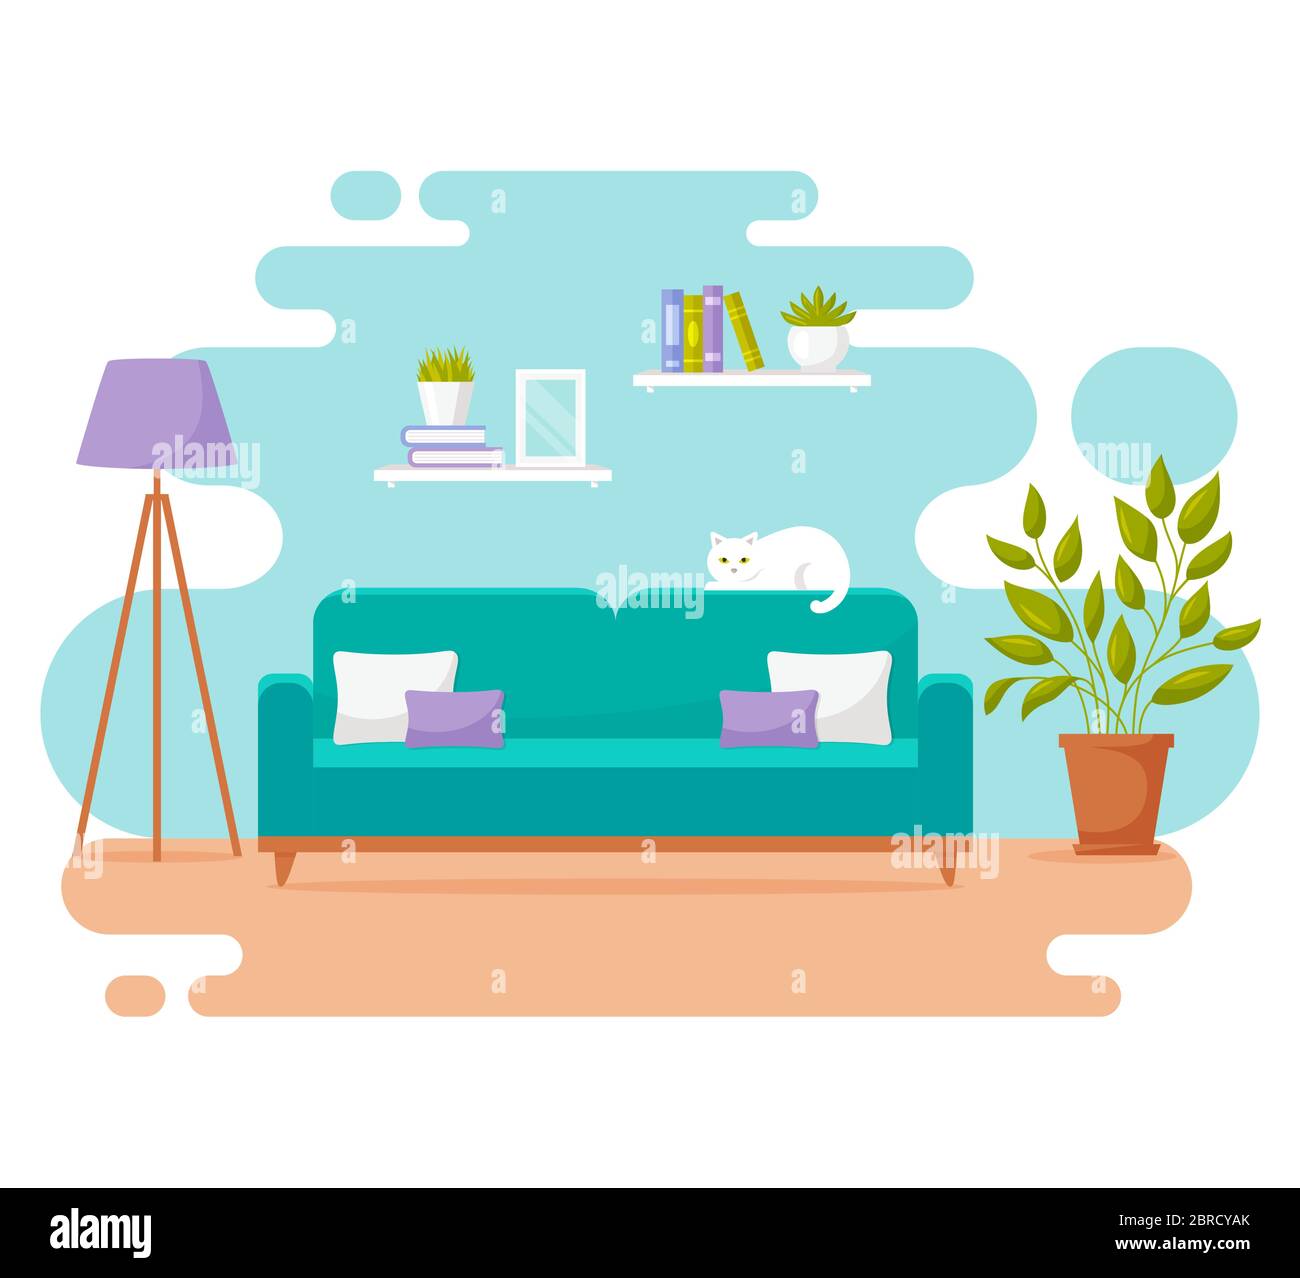 Living room interior banner. Vector design of a cozy room with sofa, floor lamp, cute cat, and decor accessories. Home illustration isolated on white. Stock Vector